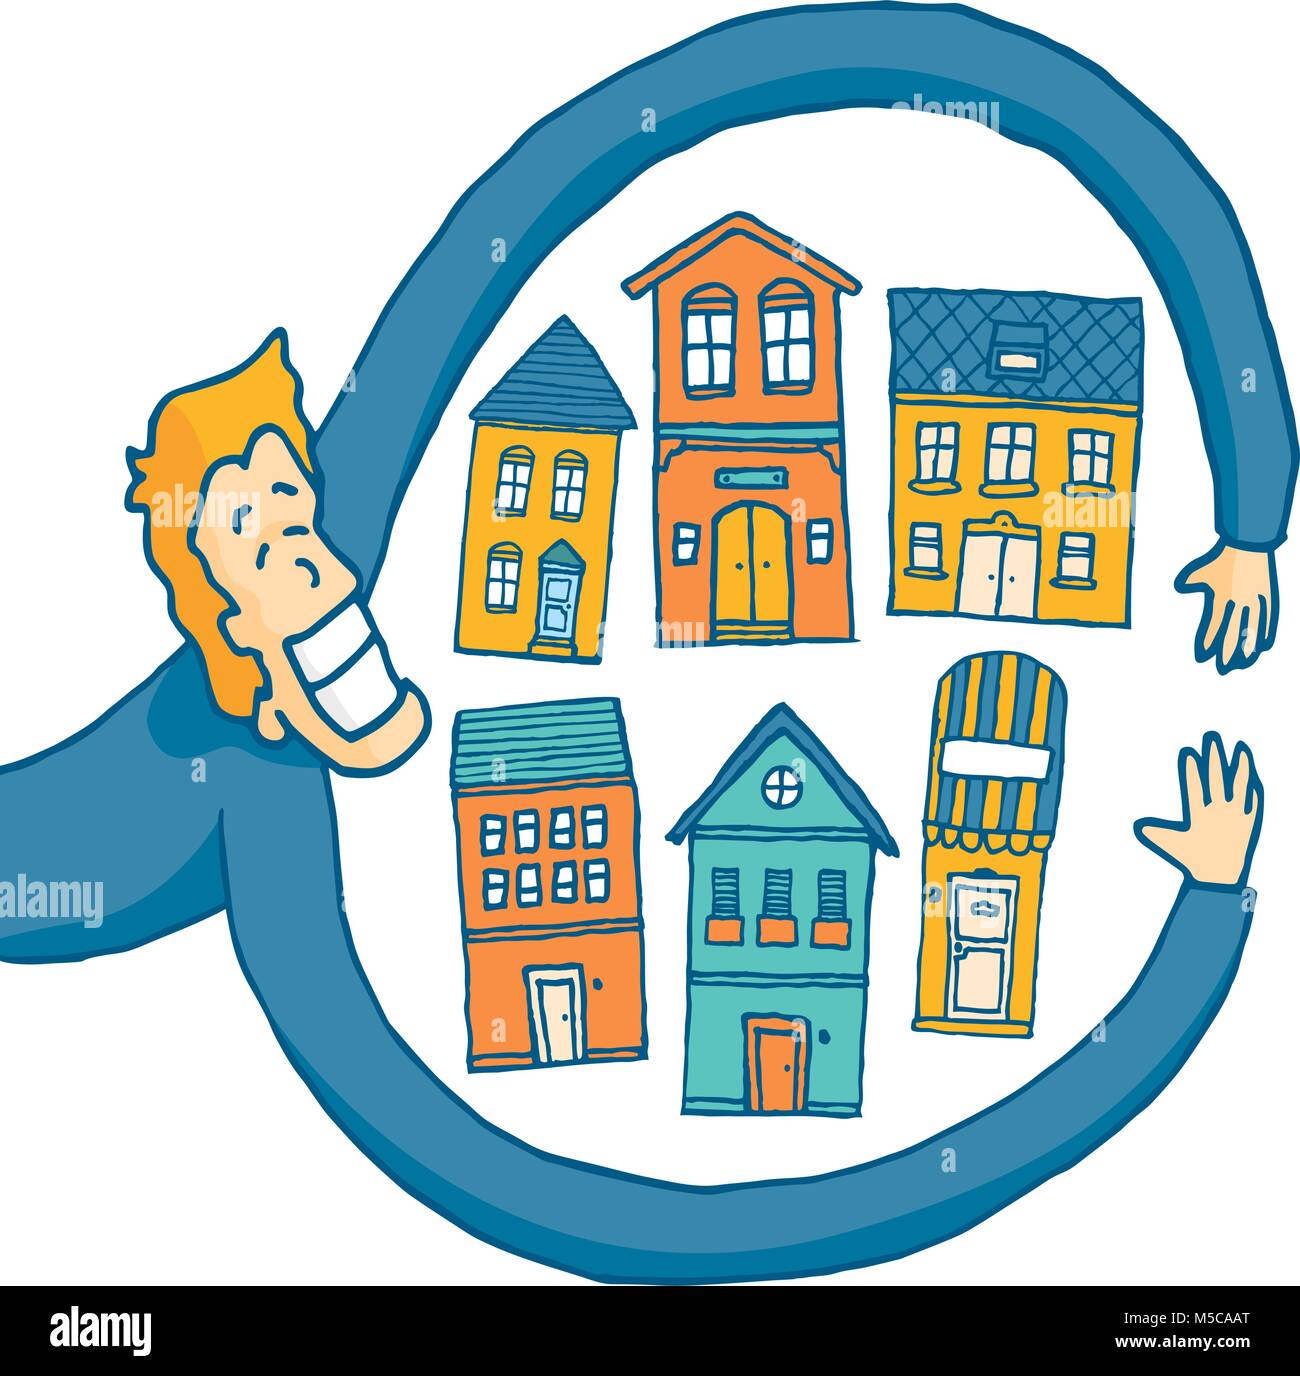 Cartoon illustration of happy man hugging colorful houses Stock Vector